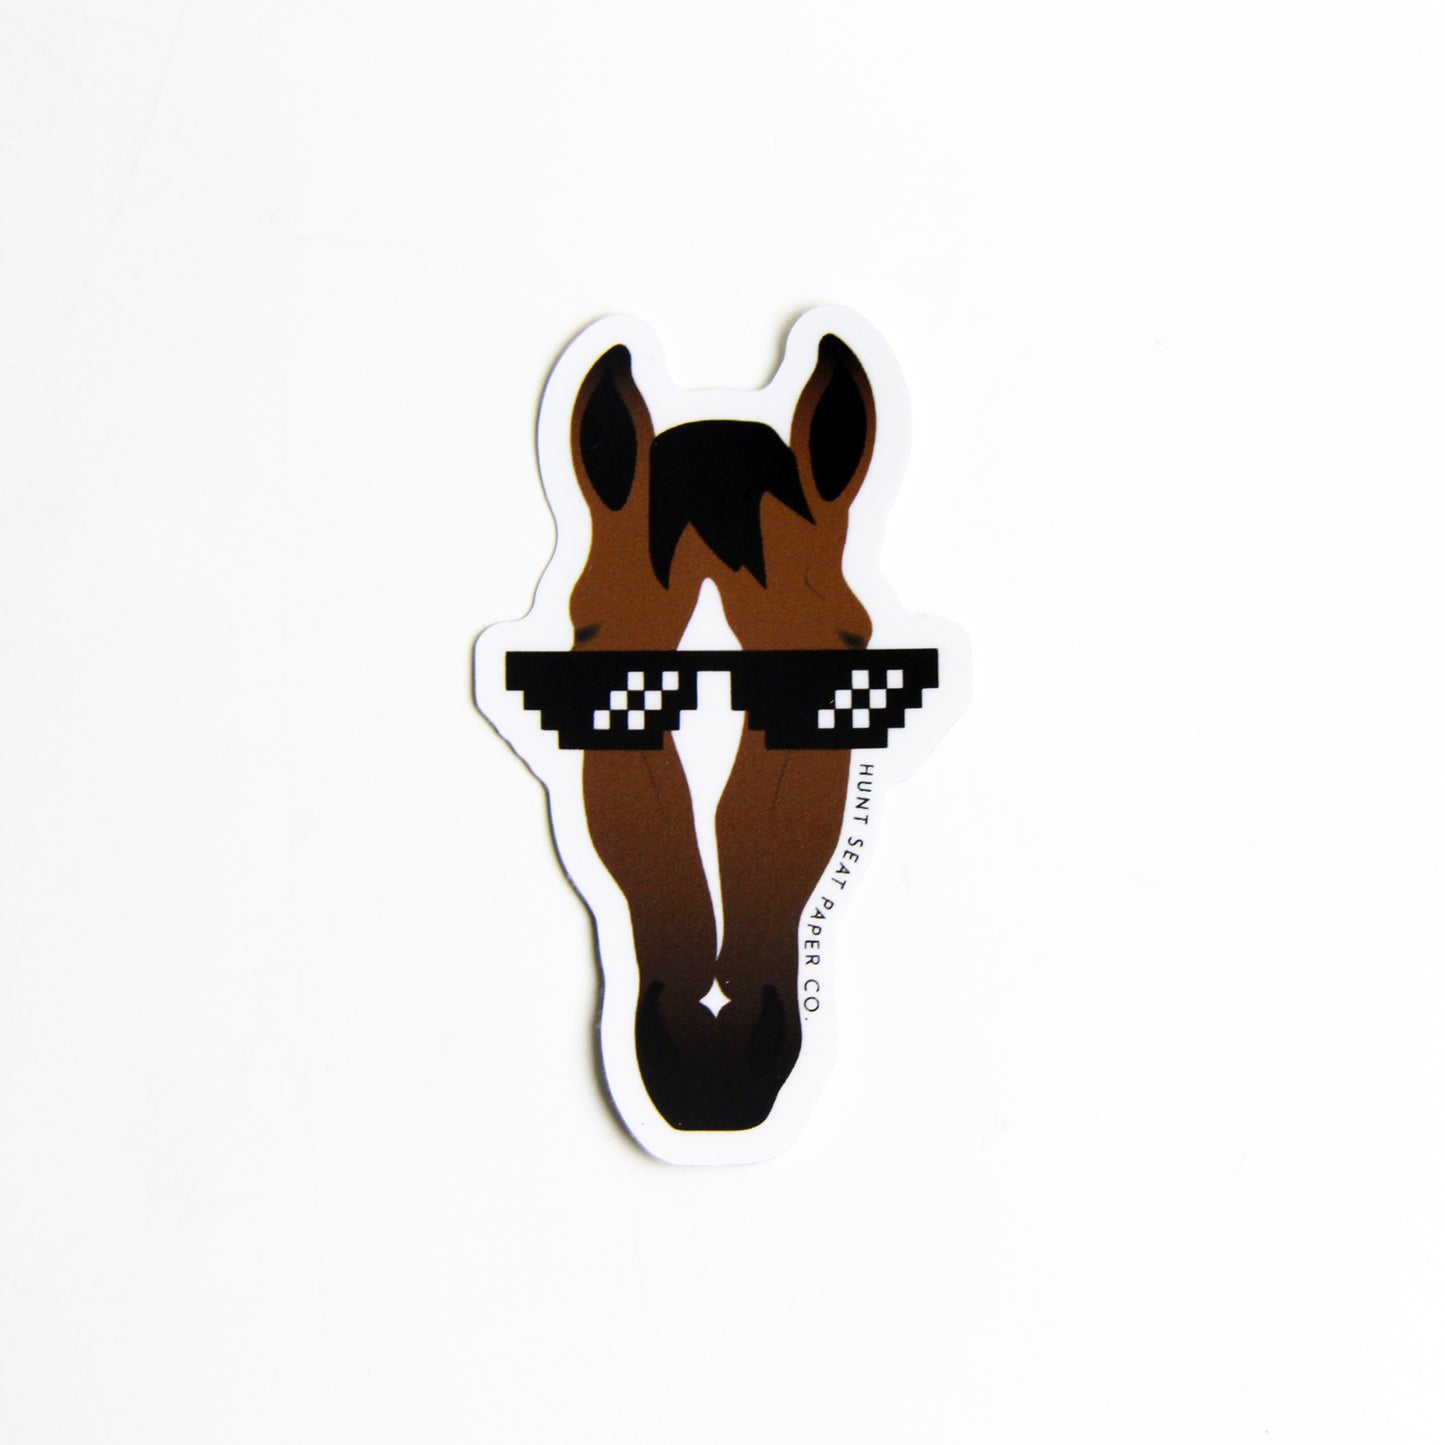 Thug life horse sticker for horse show awards and prizes for young rider equestrians, teens, adults and children.